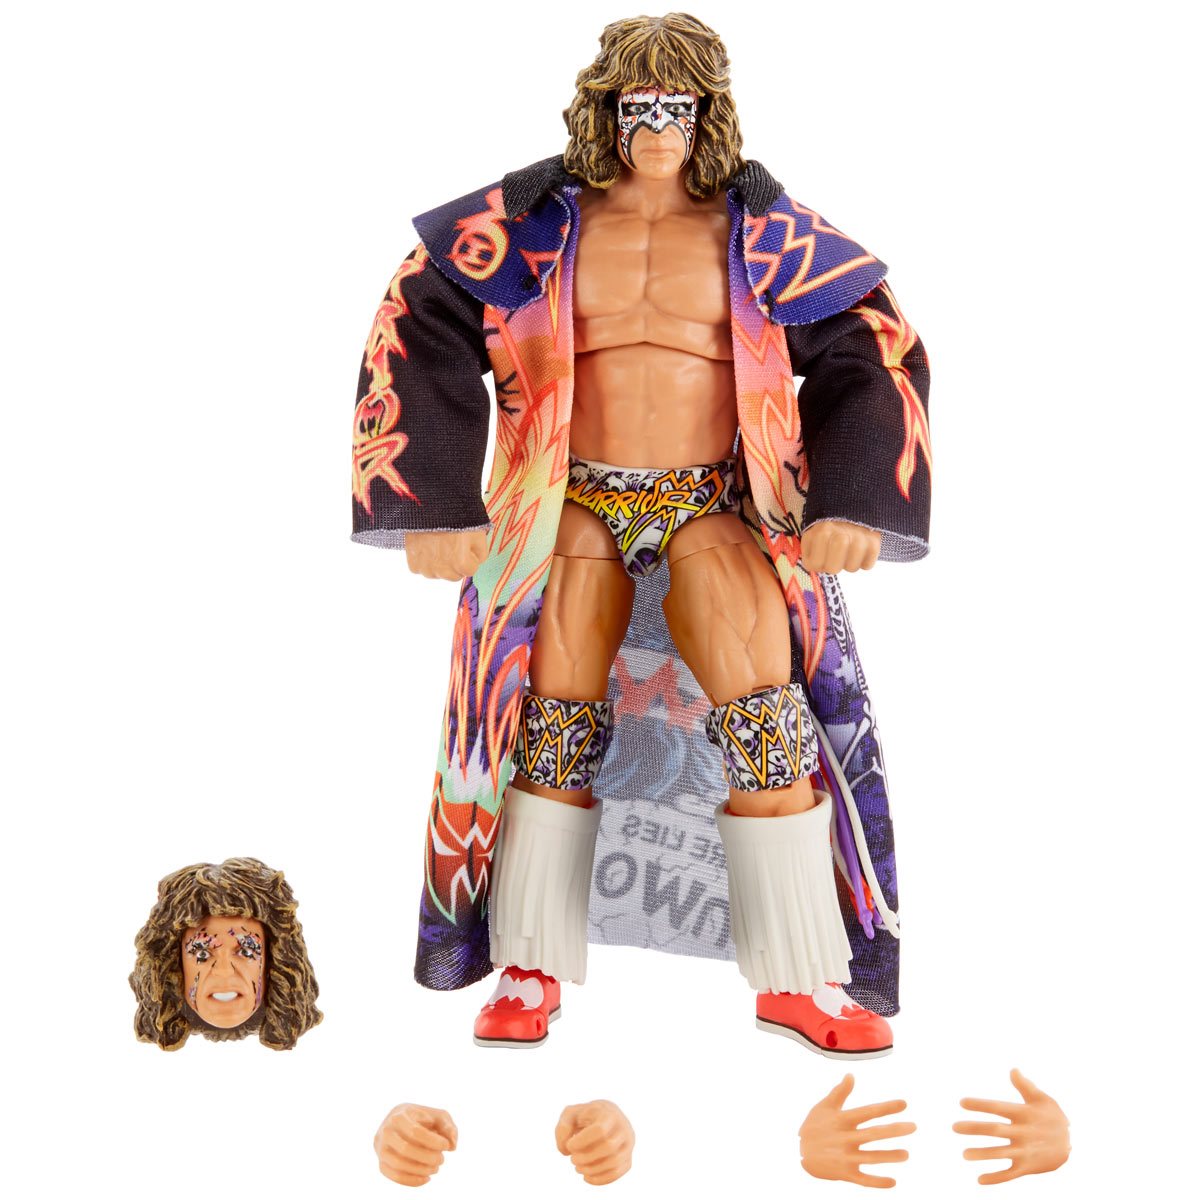 WWE Ultimate Edition Best Of Wave 2 Ultimate Warrior Action Figure - Heretoserveyou